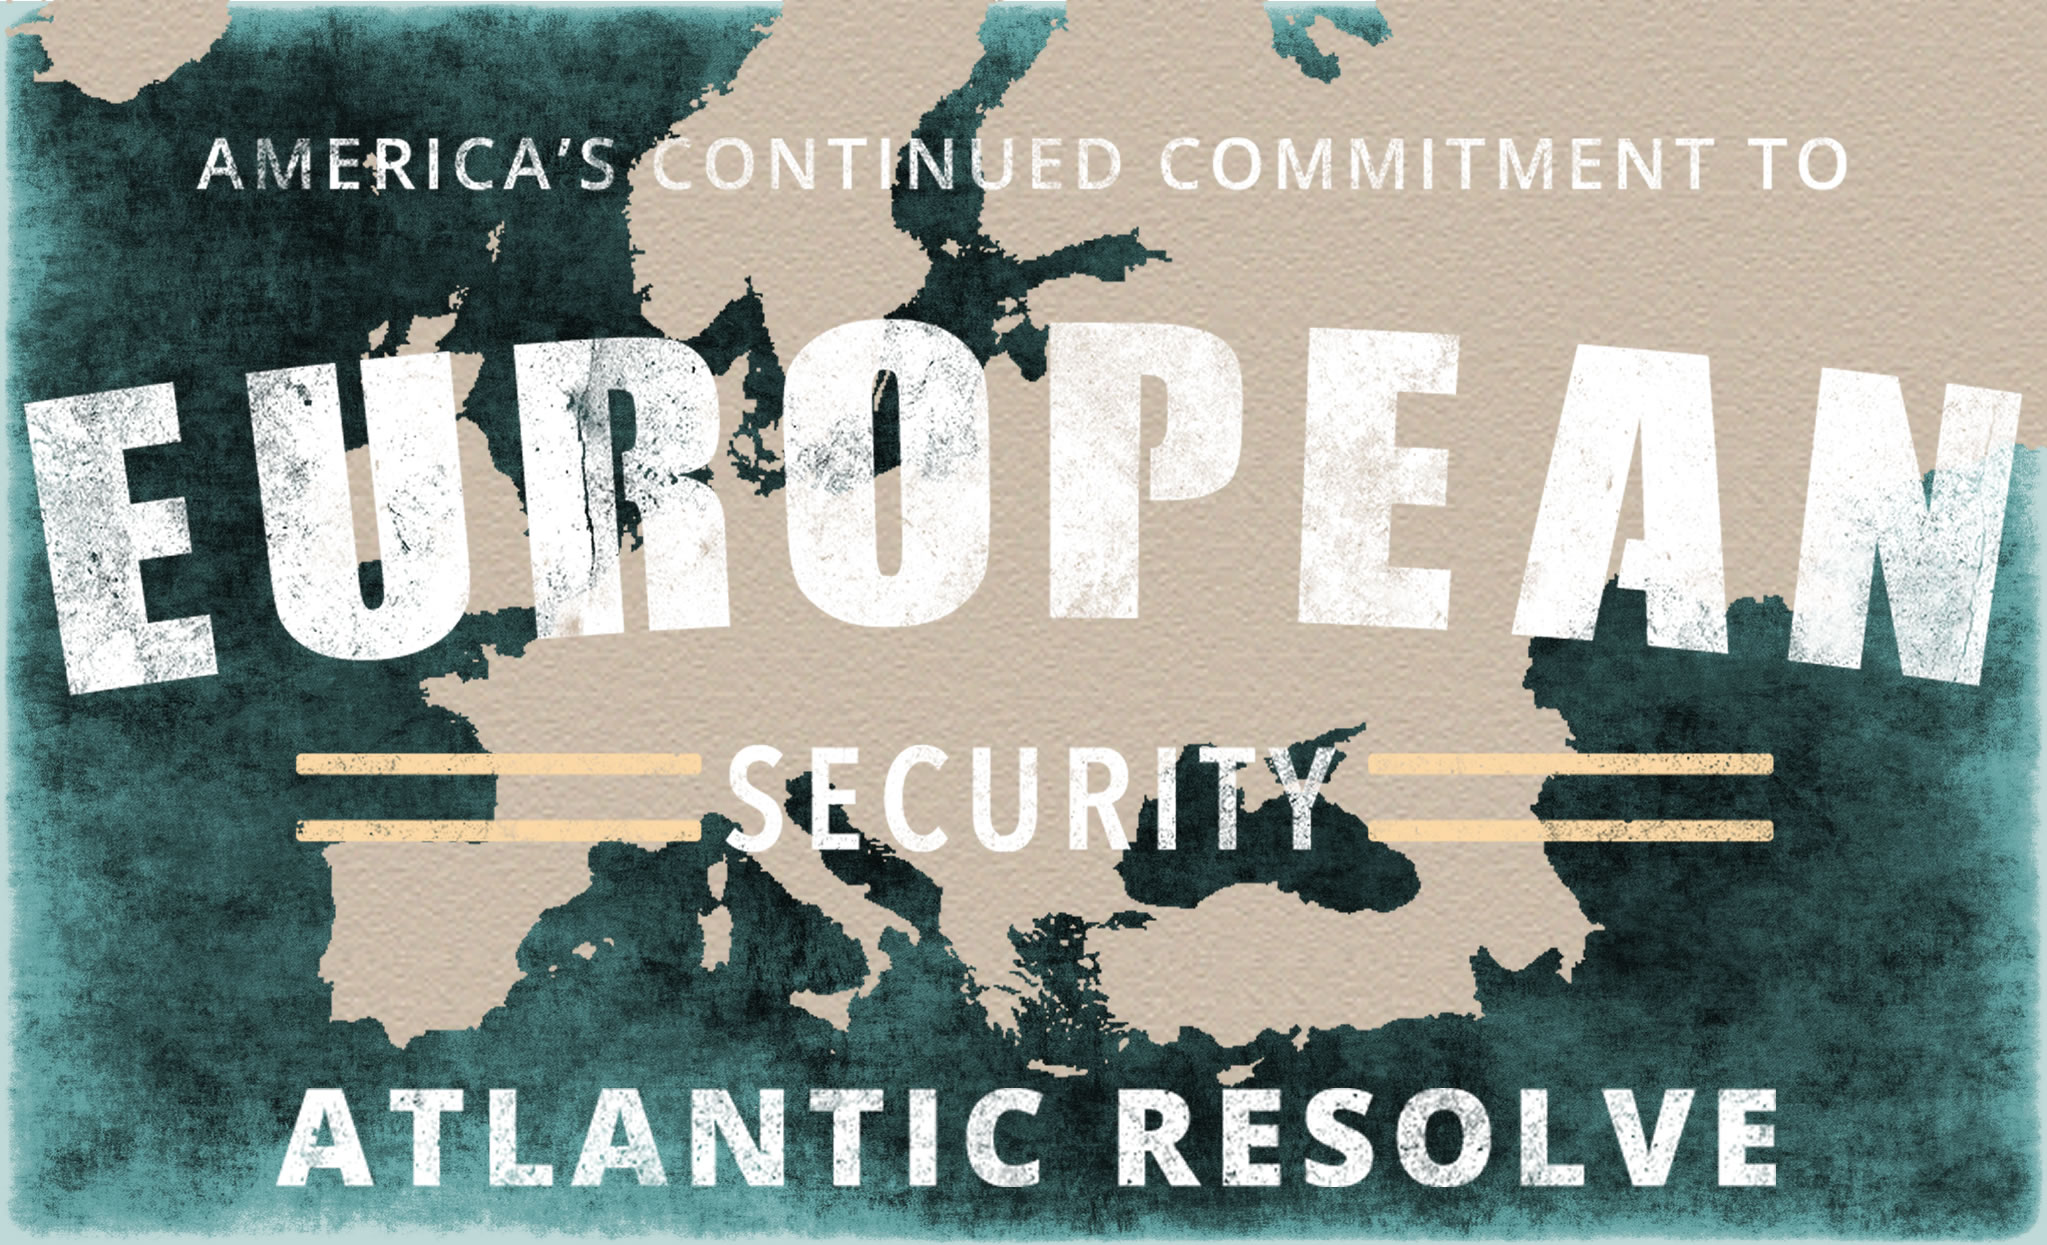 Press Release: Eighth Atlantic Resolve armored rotation set to begin  mission > U.S. Army Europe and Africa > Article View Press Release